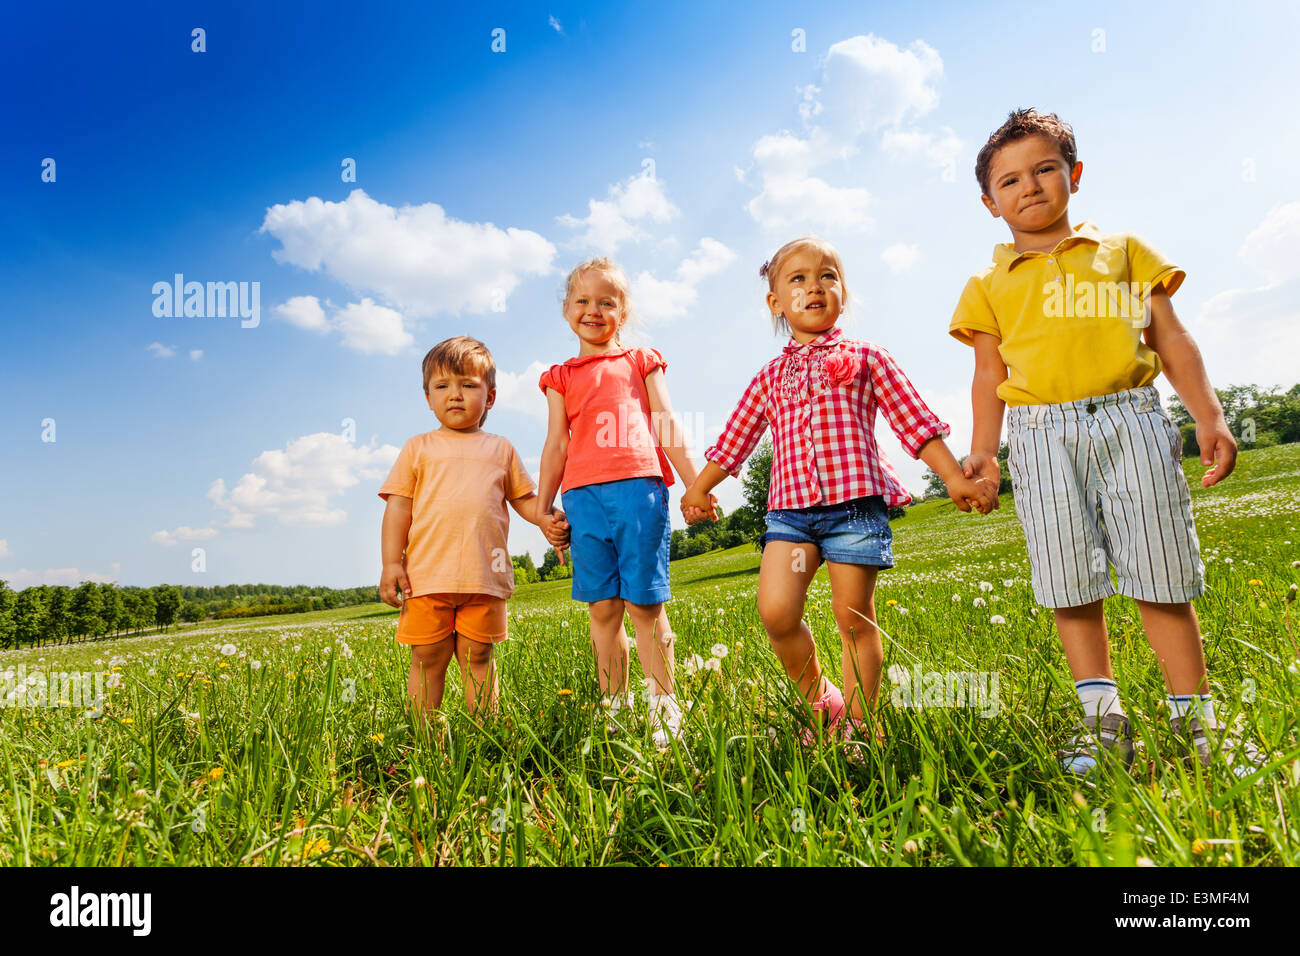 Four children holding hands and standing together Stock Photo